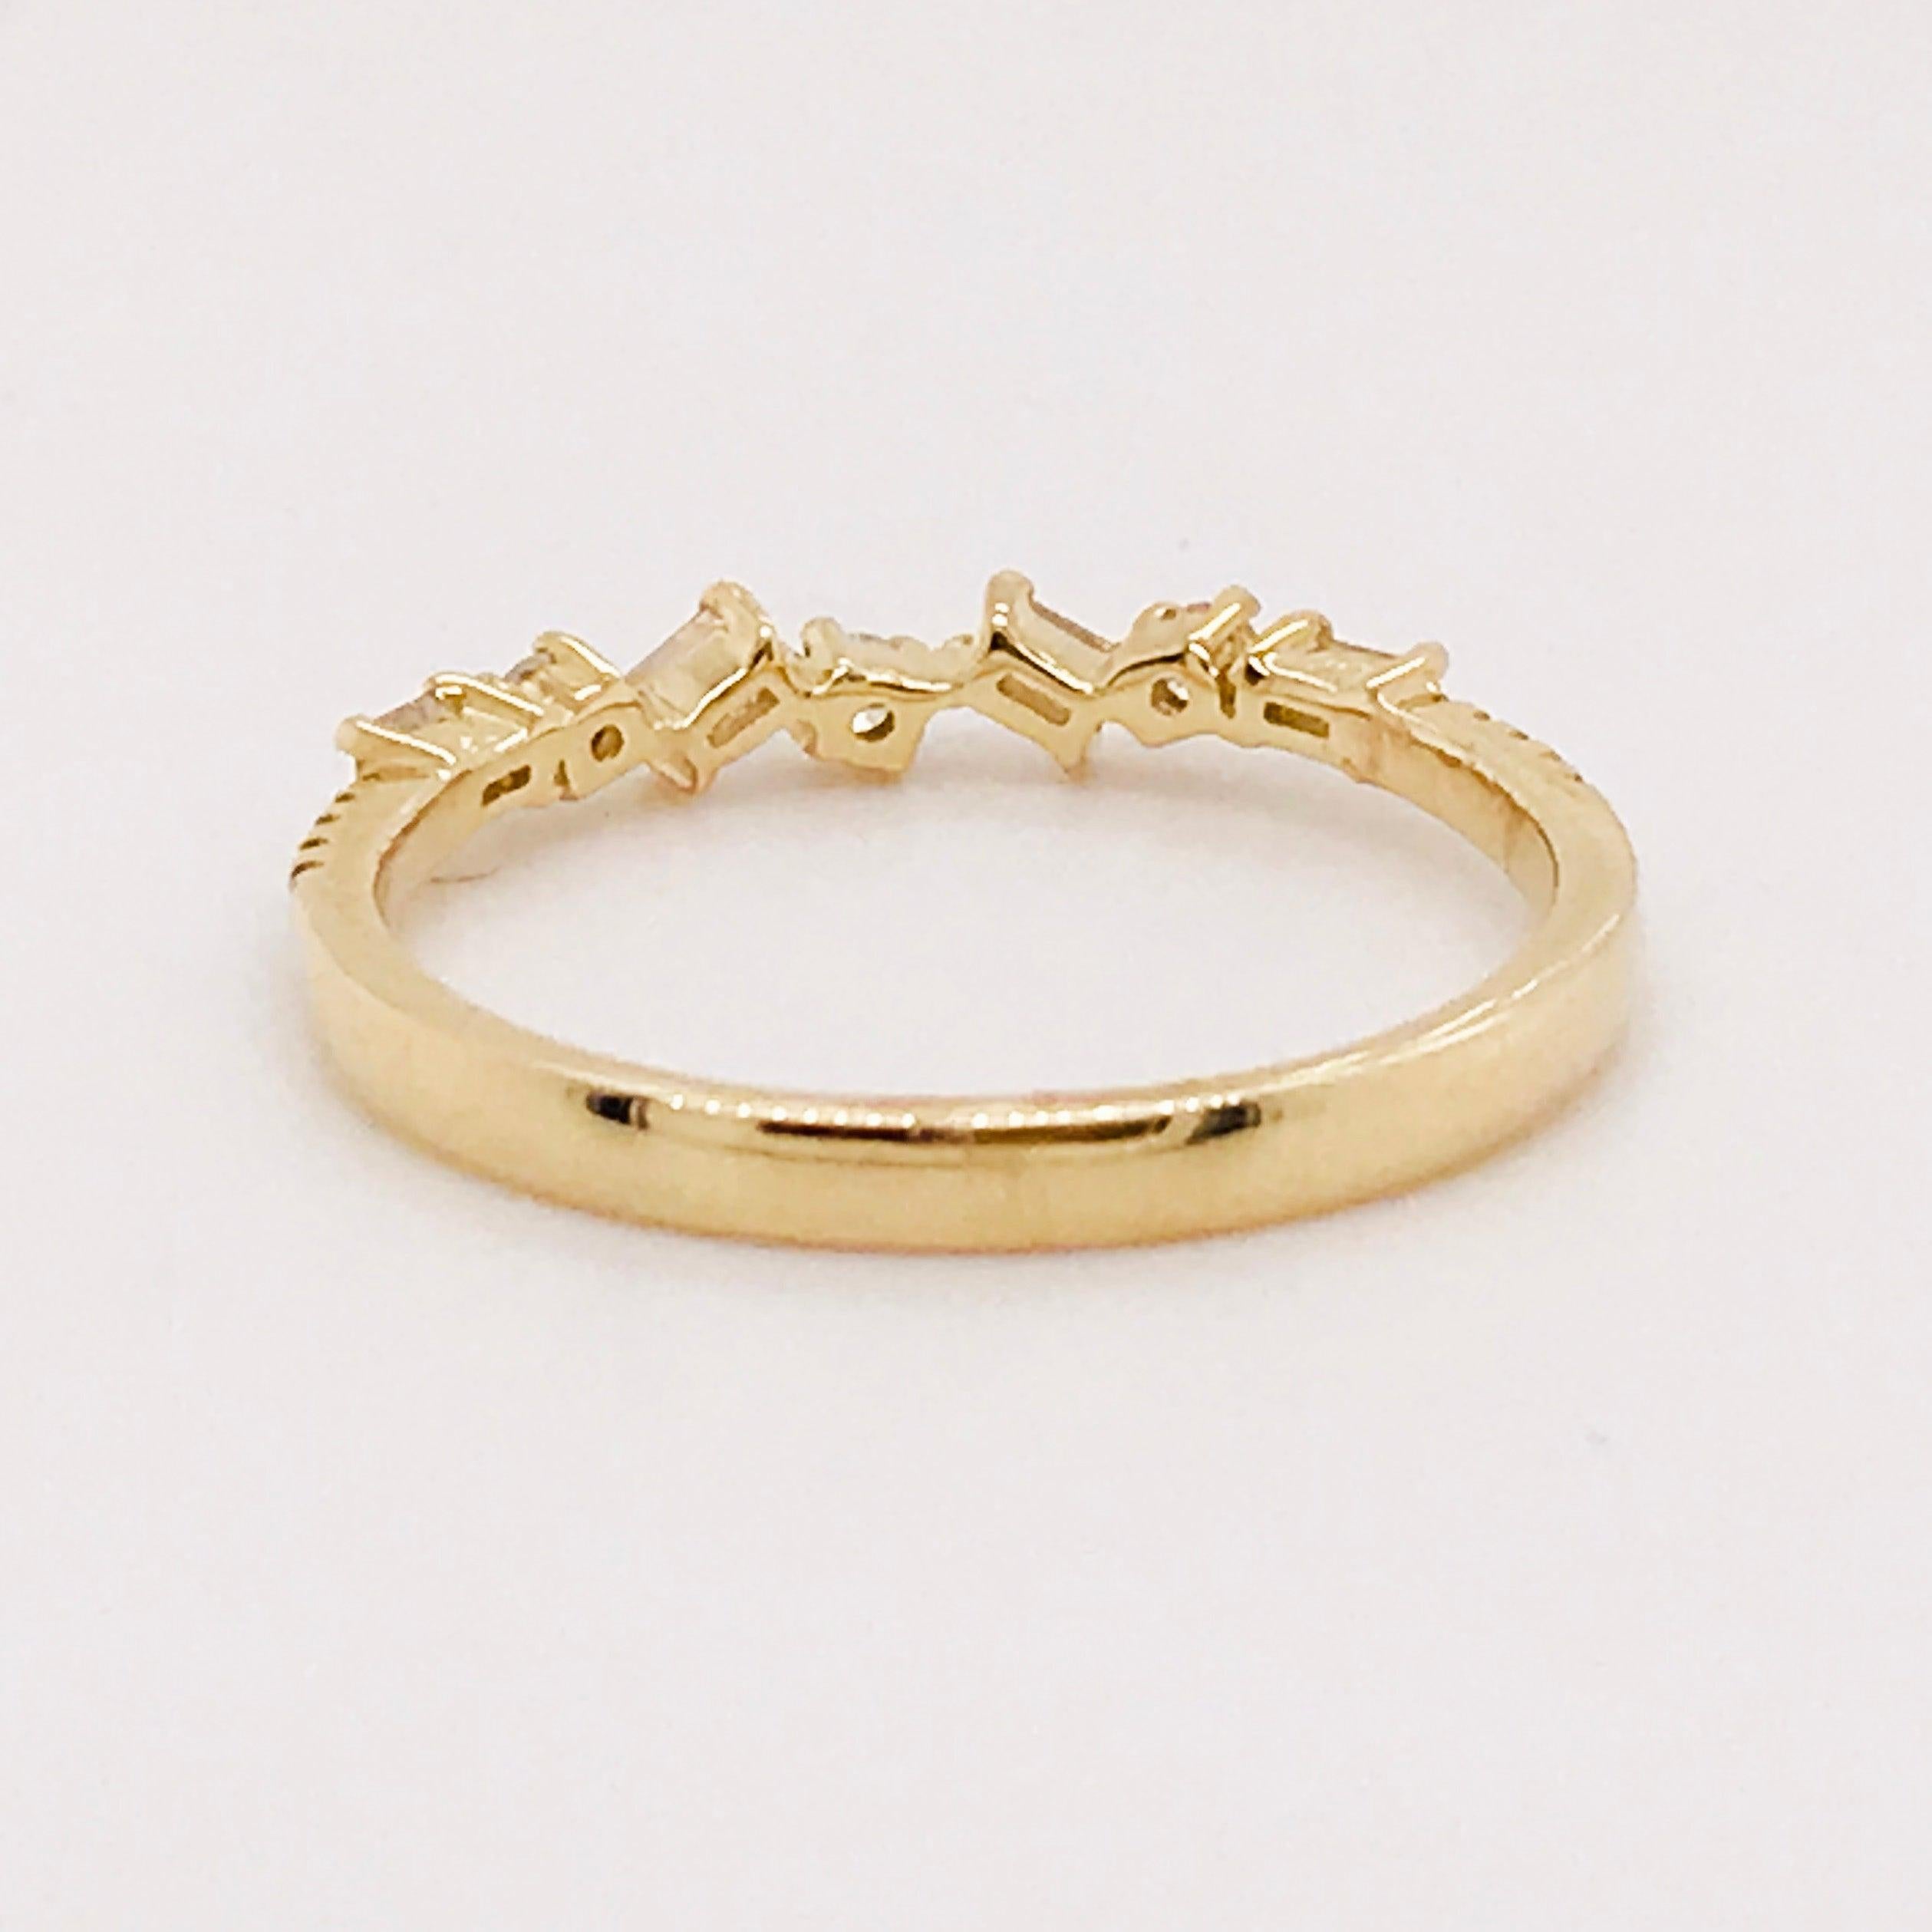 For Sale:  0.17 Carat Diamond Baguette and Round Ring, Stackable Diamond Band in 14k Gold 8